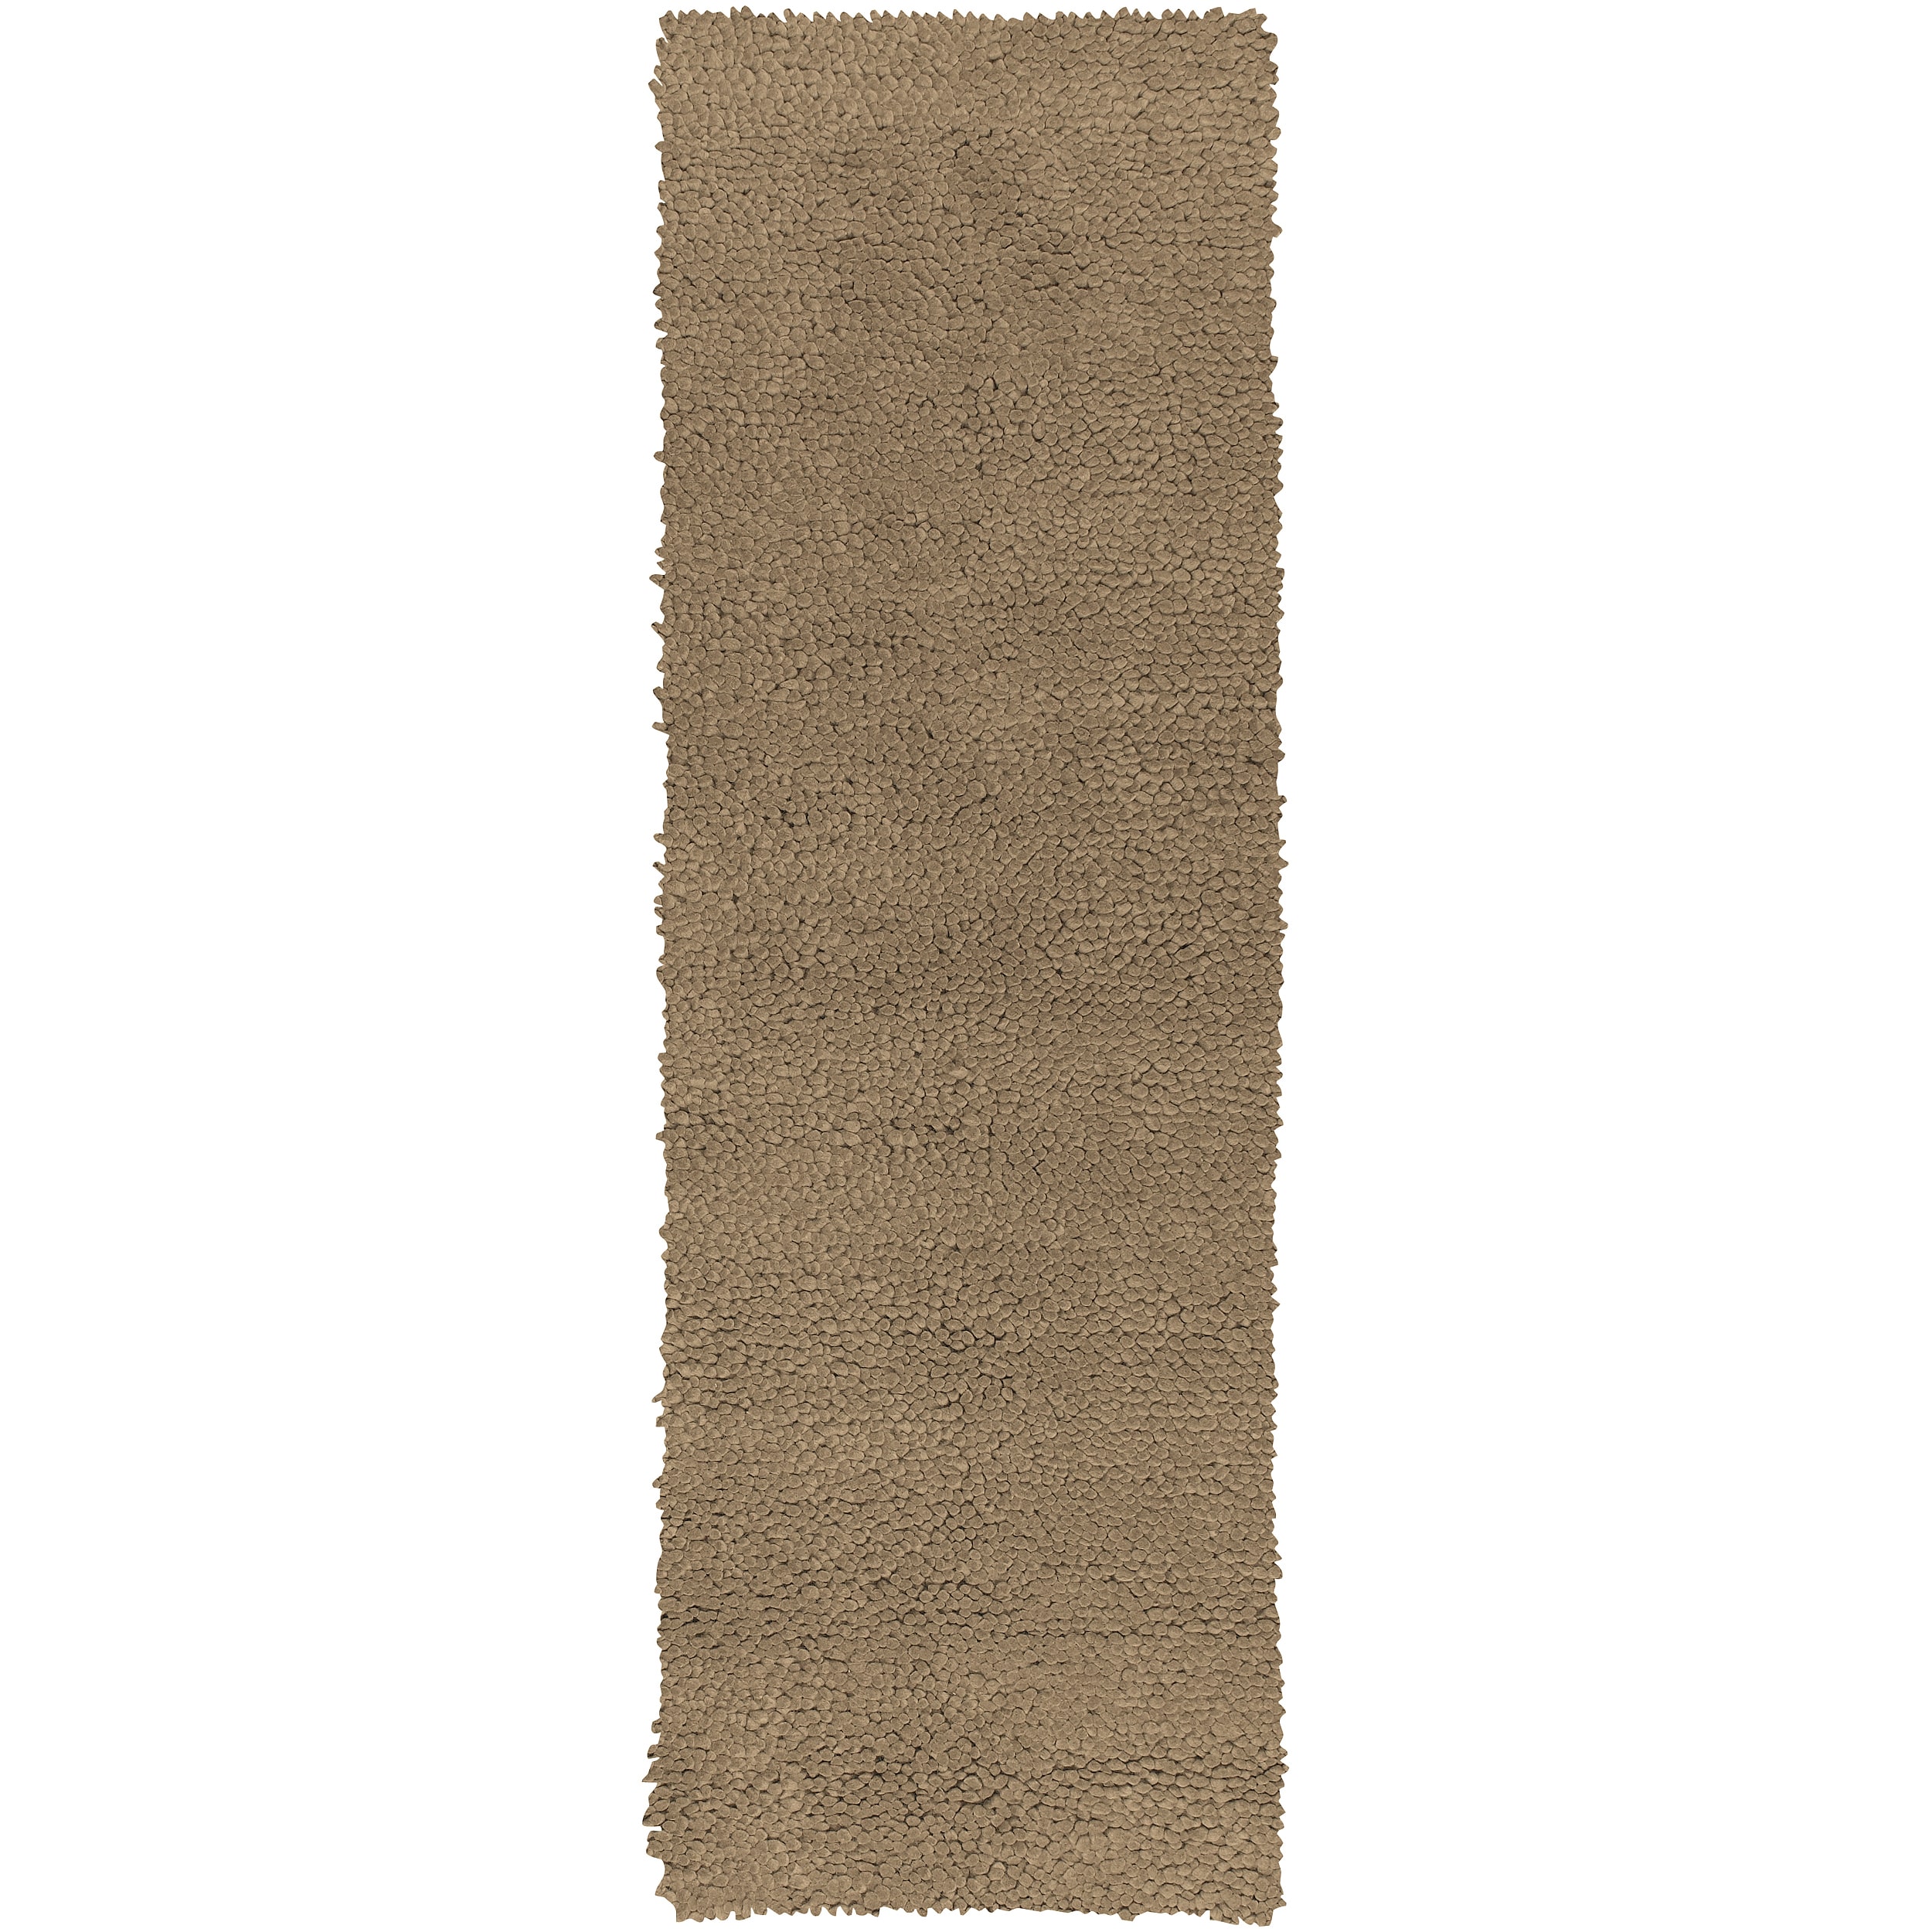 Hand-woven Ault Tan Wool Rug (4' x 10')